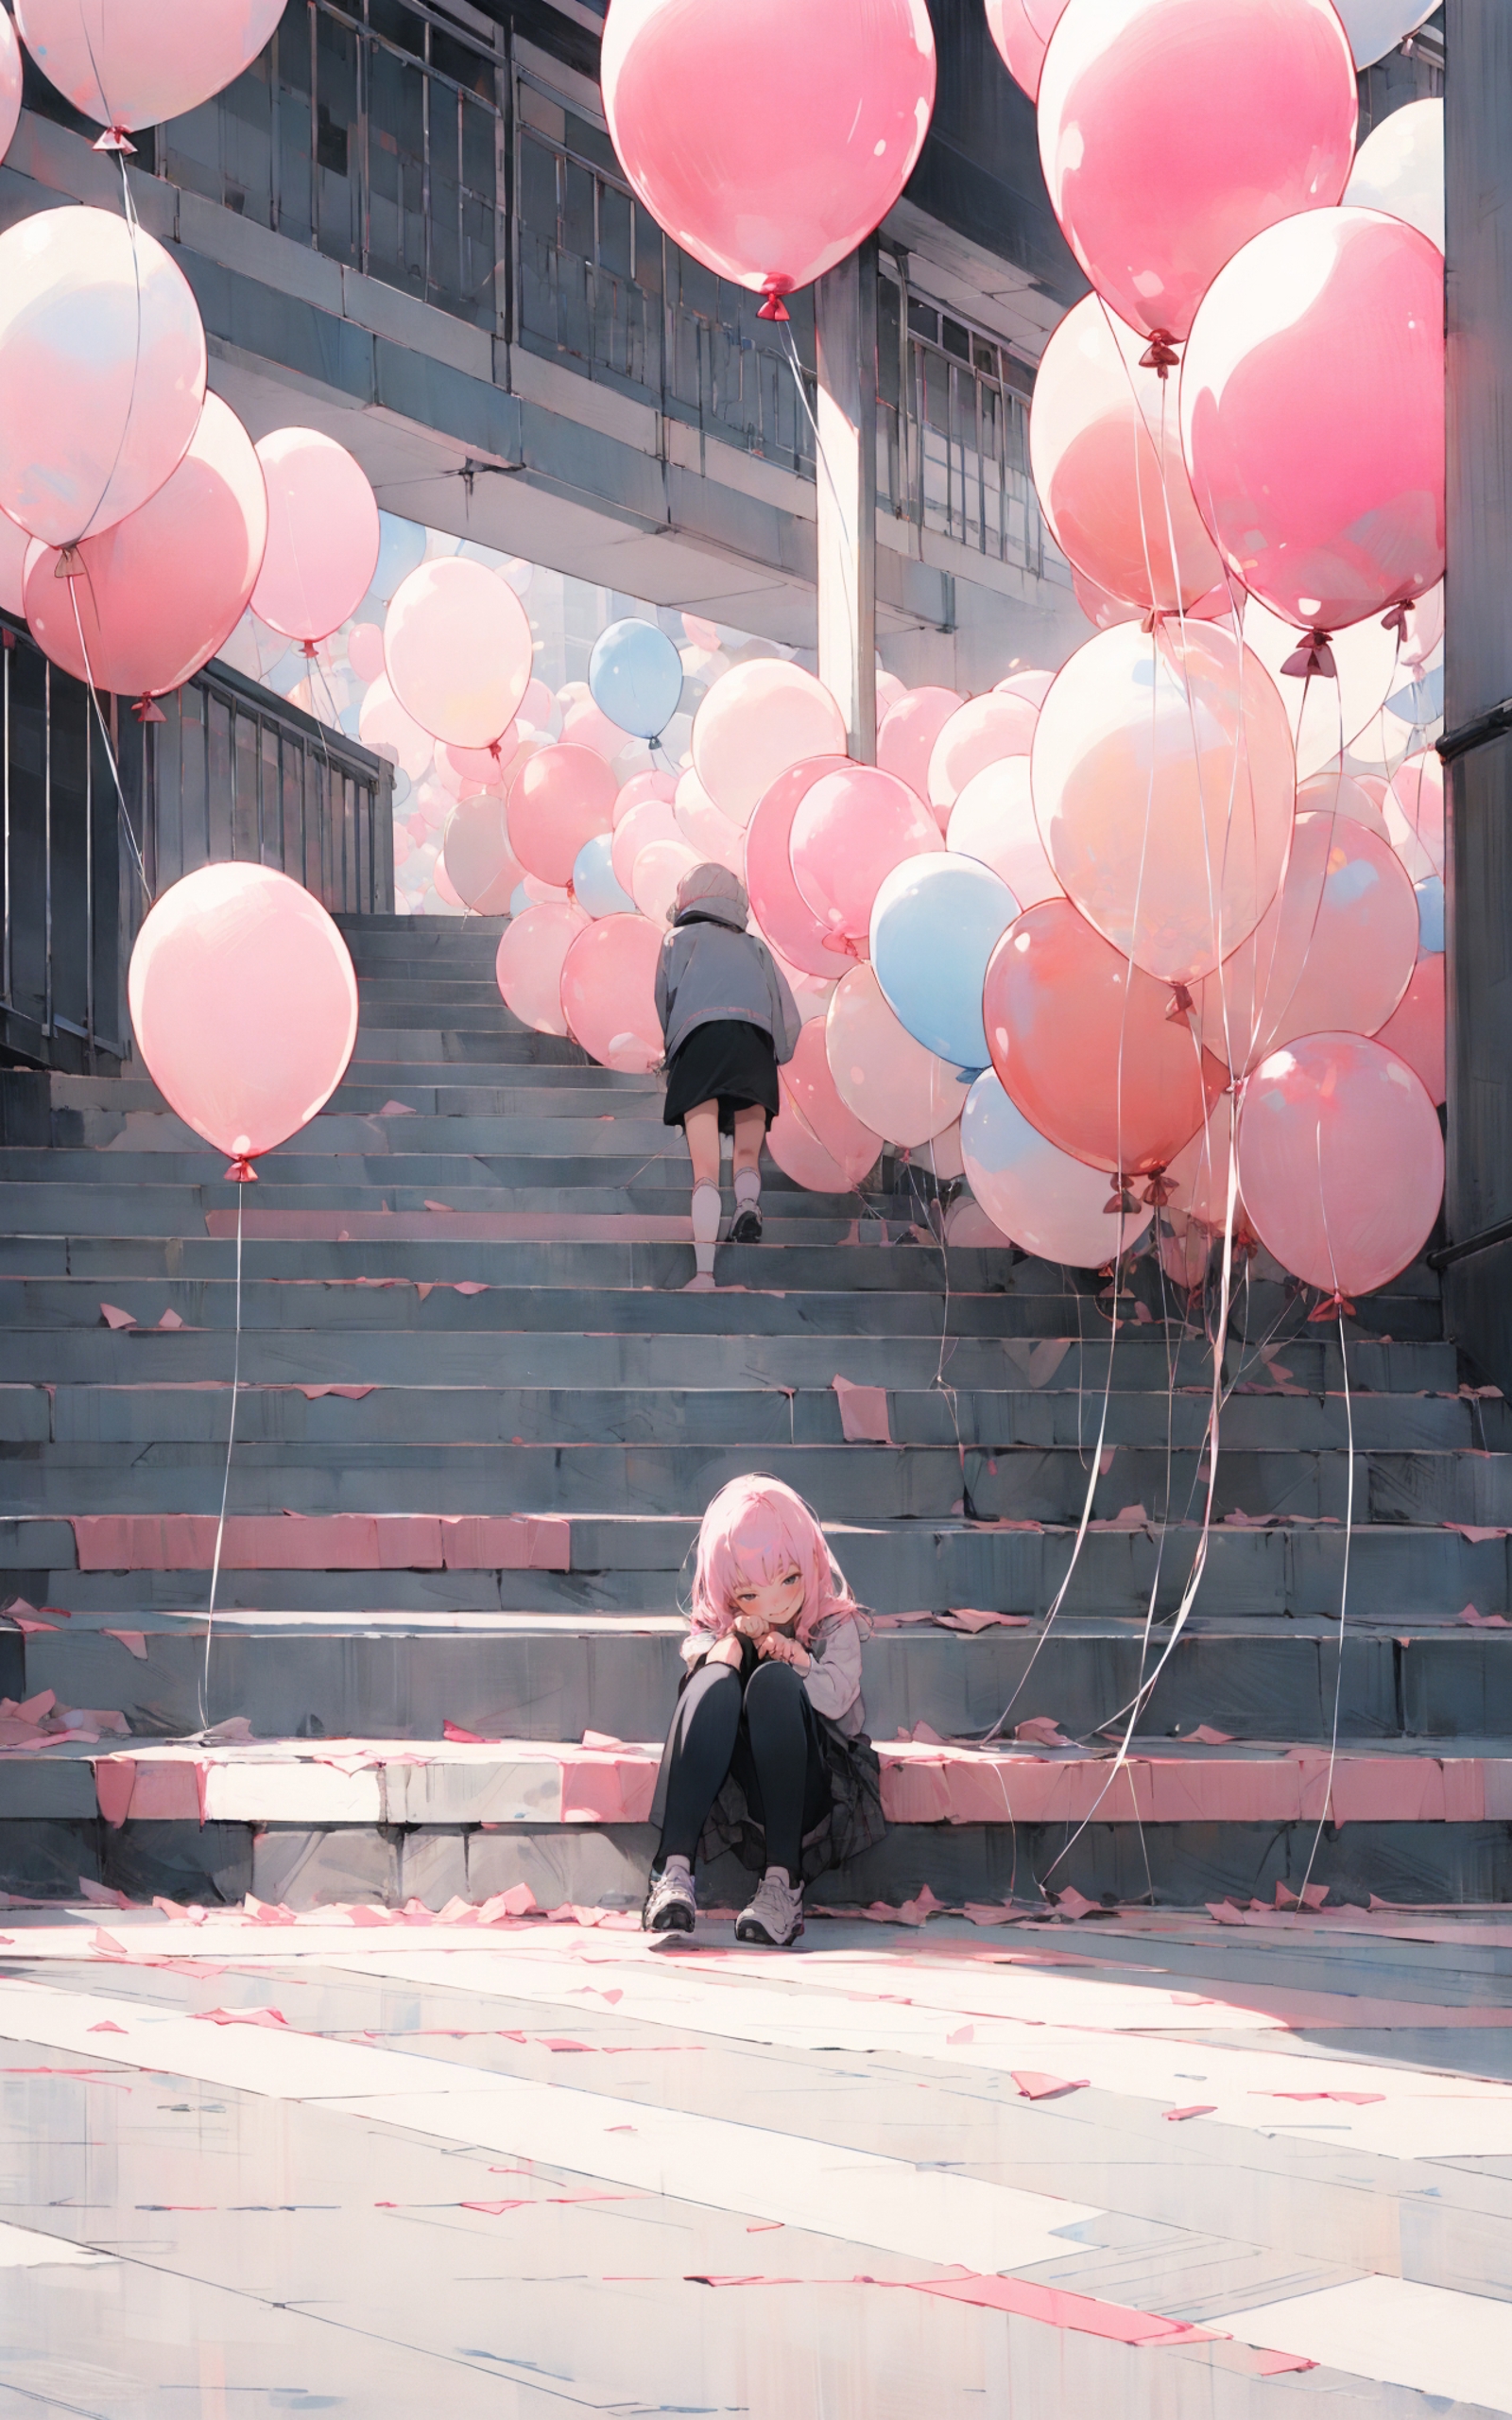 A little girl sitting on the stairs surrounded by balloons.